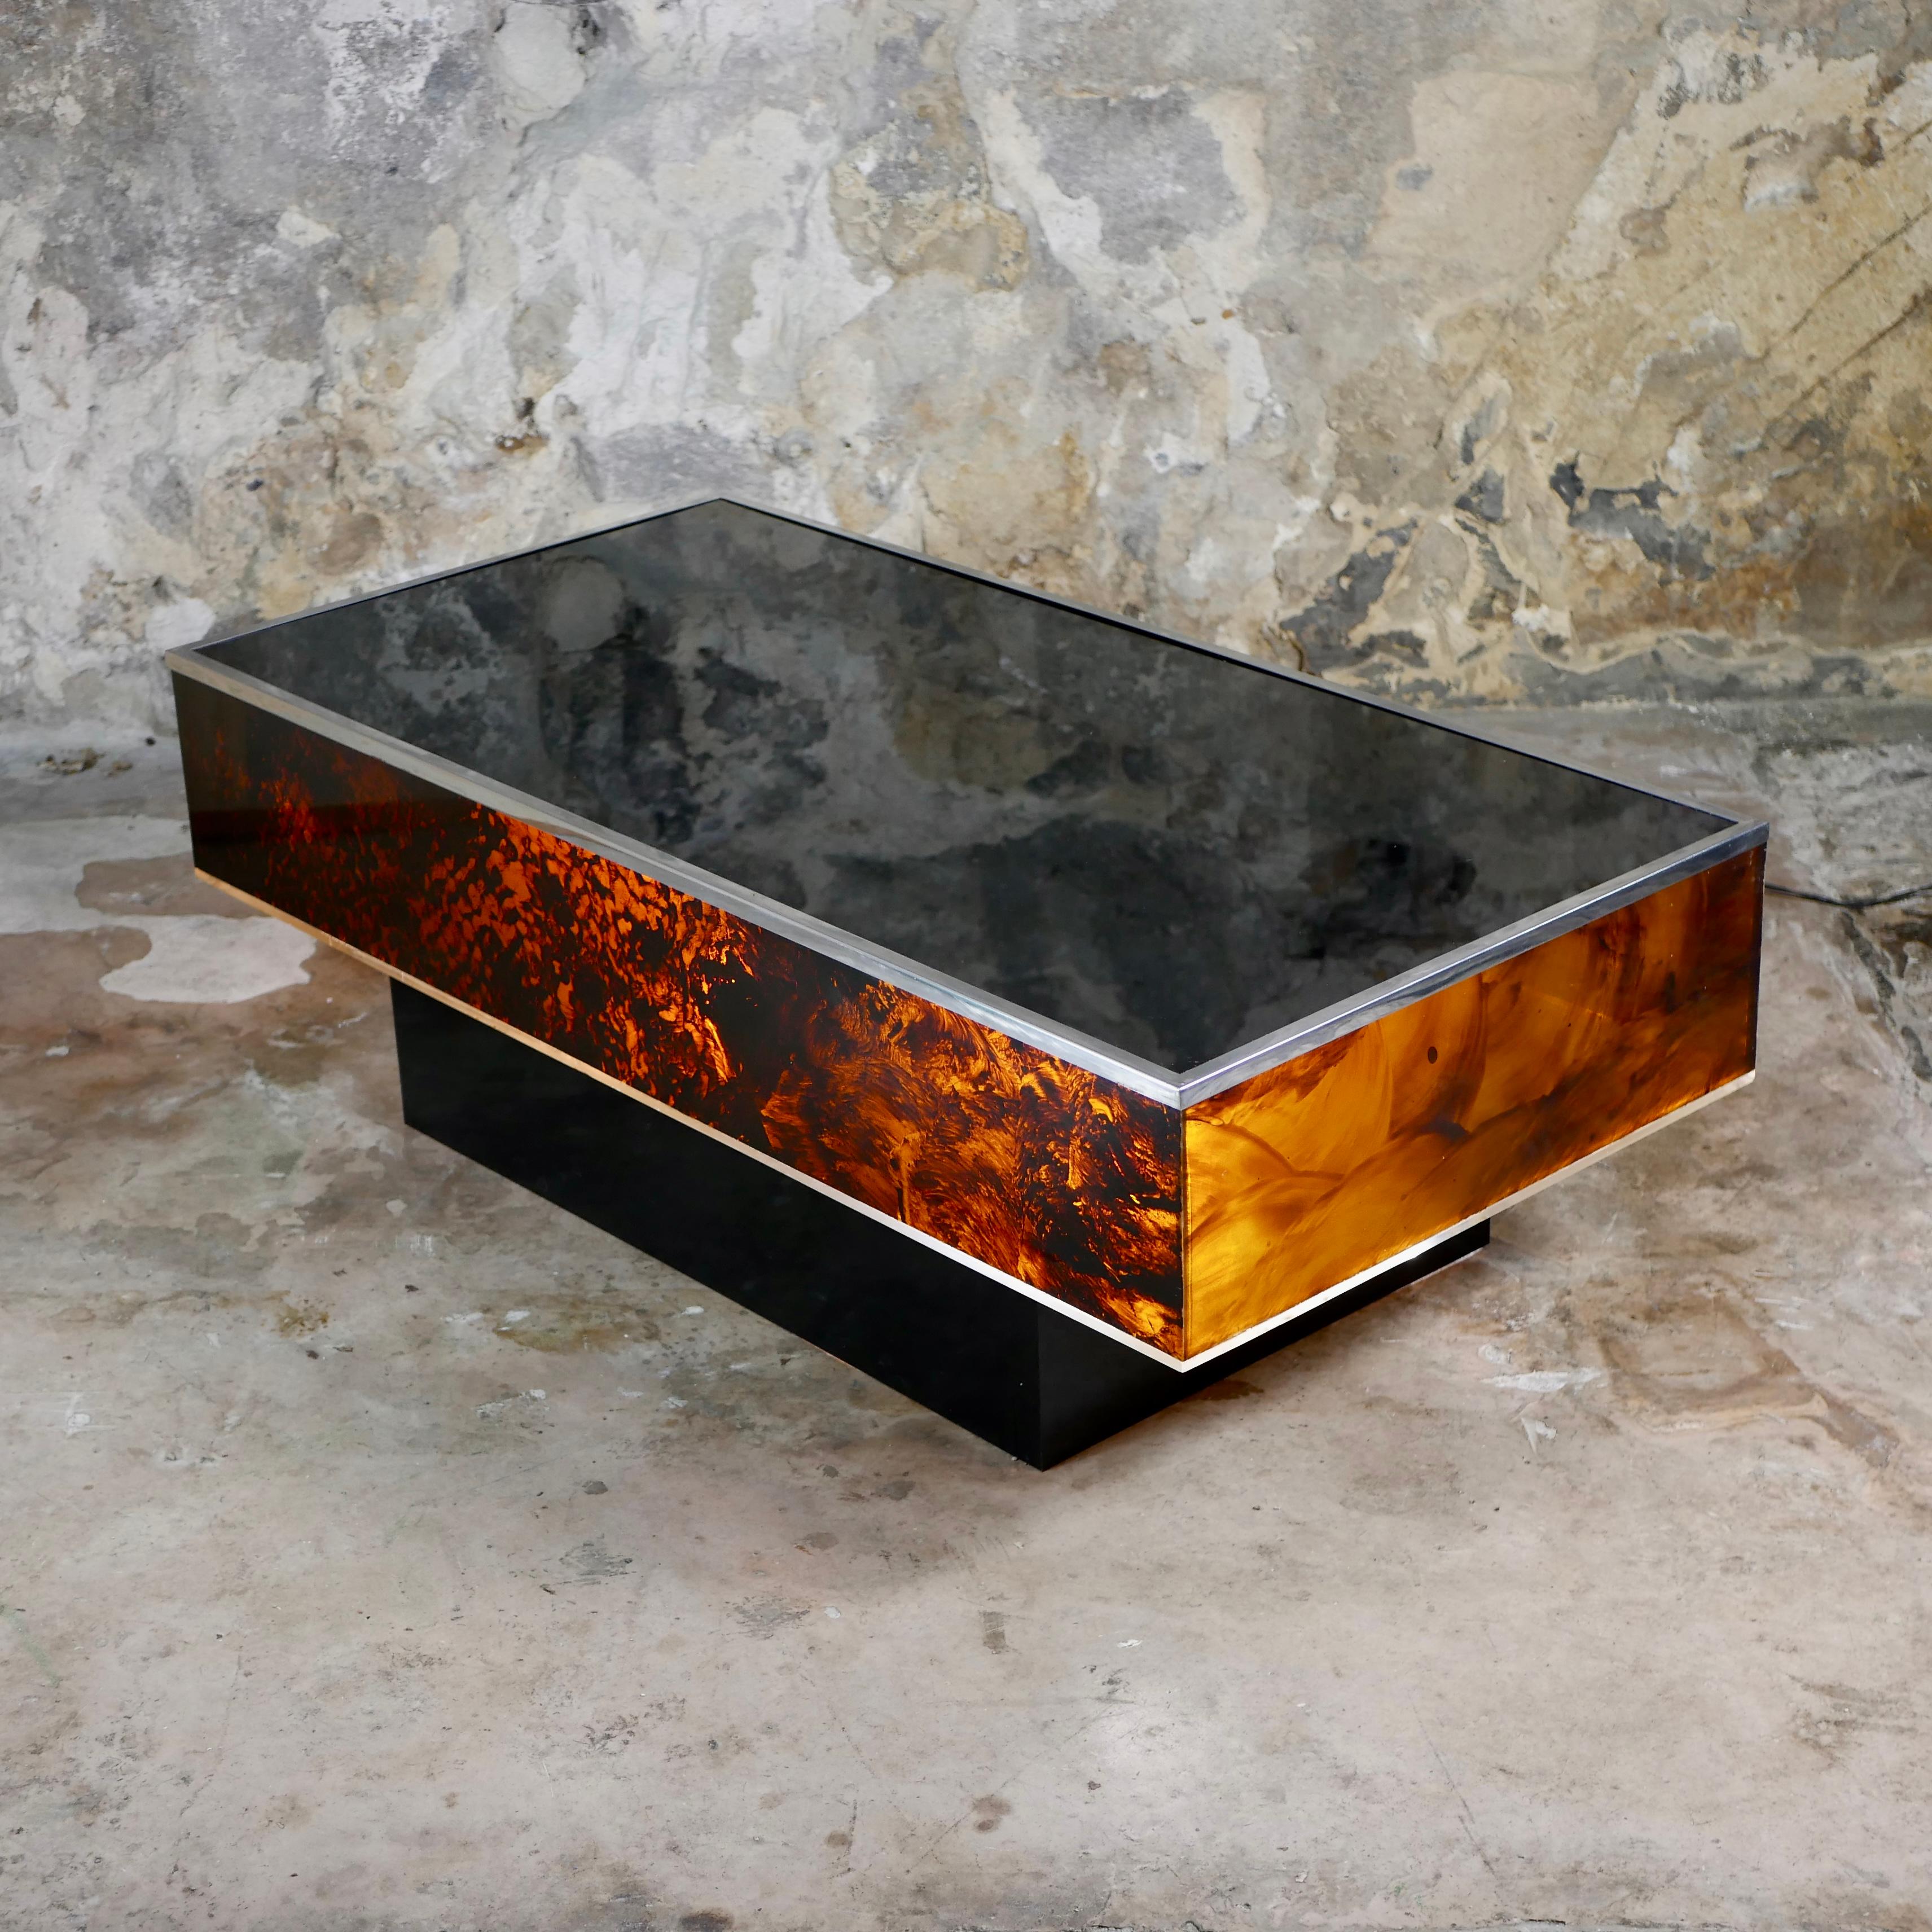 Lighted up coffee table, in faux tortoise lucite, in the style of Willy Rizzo, Dior Homme or Jean-Claude Mahey, made in Italy in the 1970s.
Faux tortoise lucite and black glass top, with a chromed steel rim. Electrified, with 2 bulbs under the